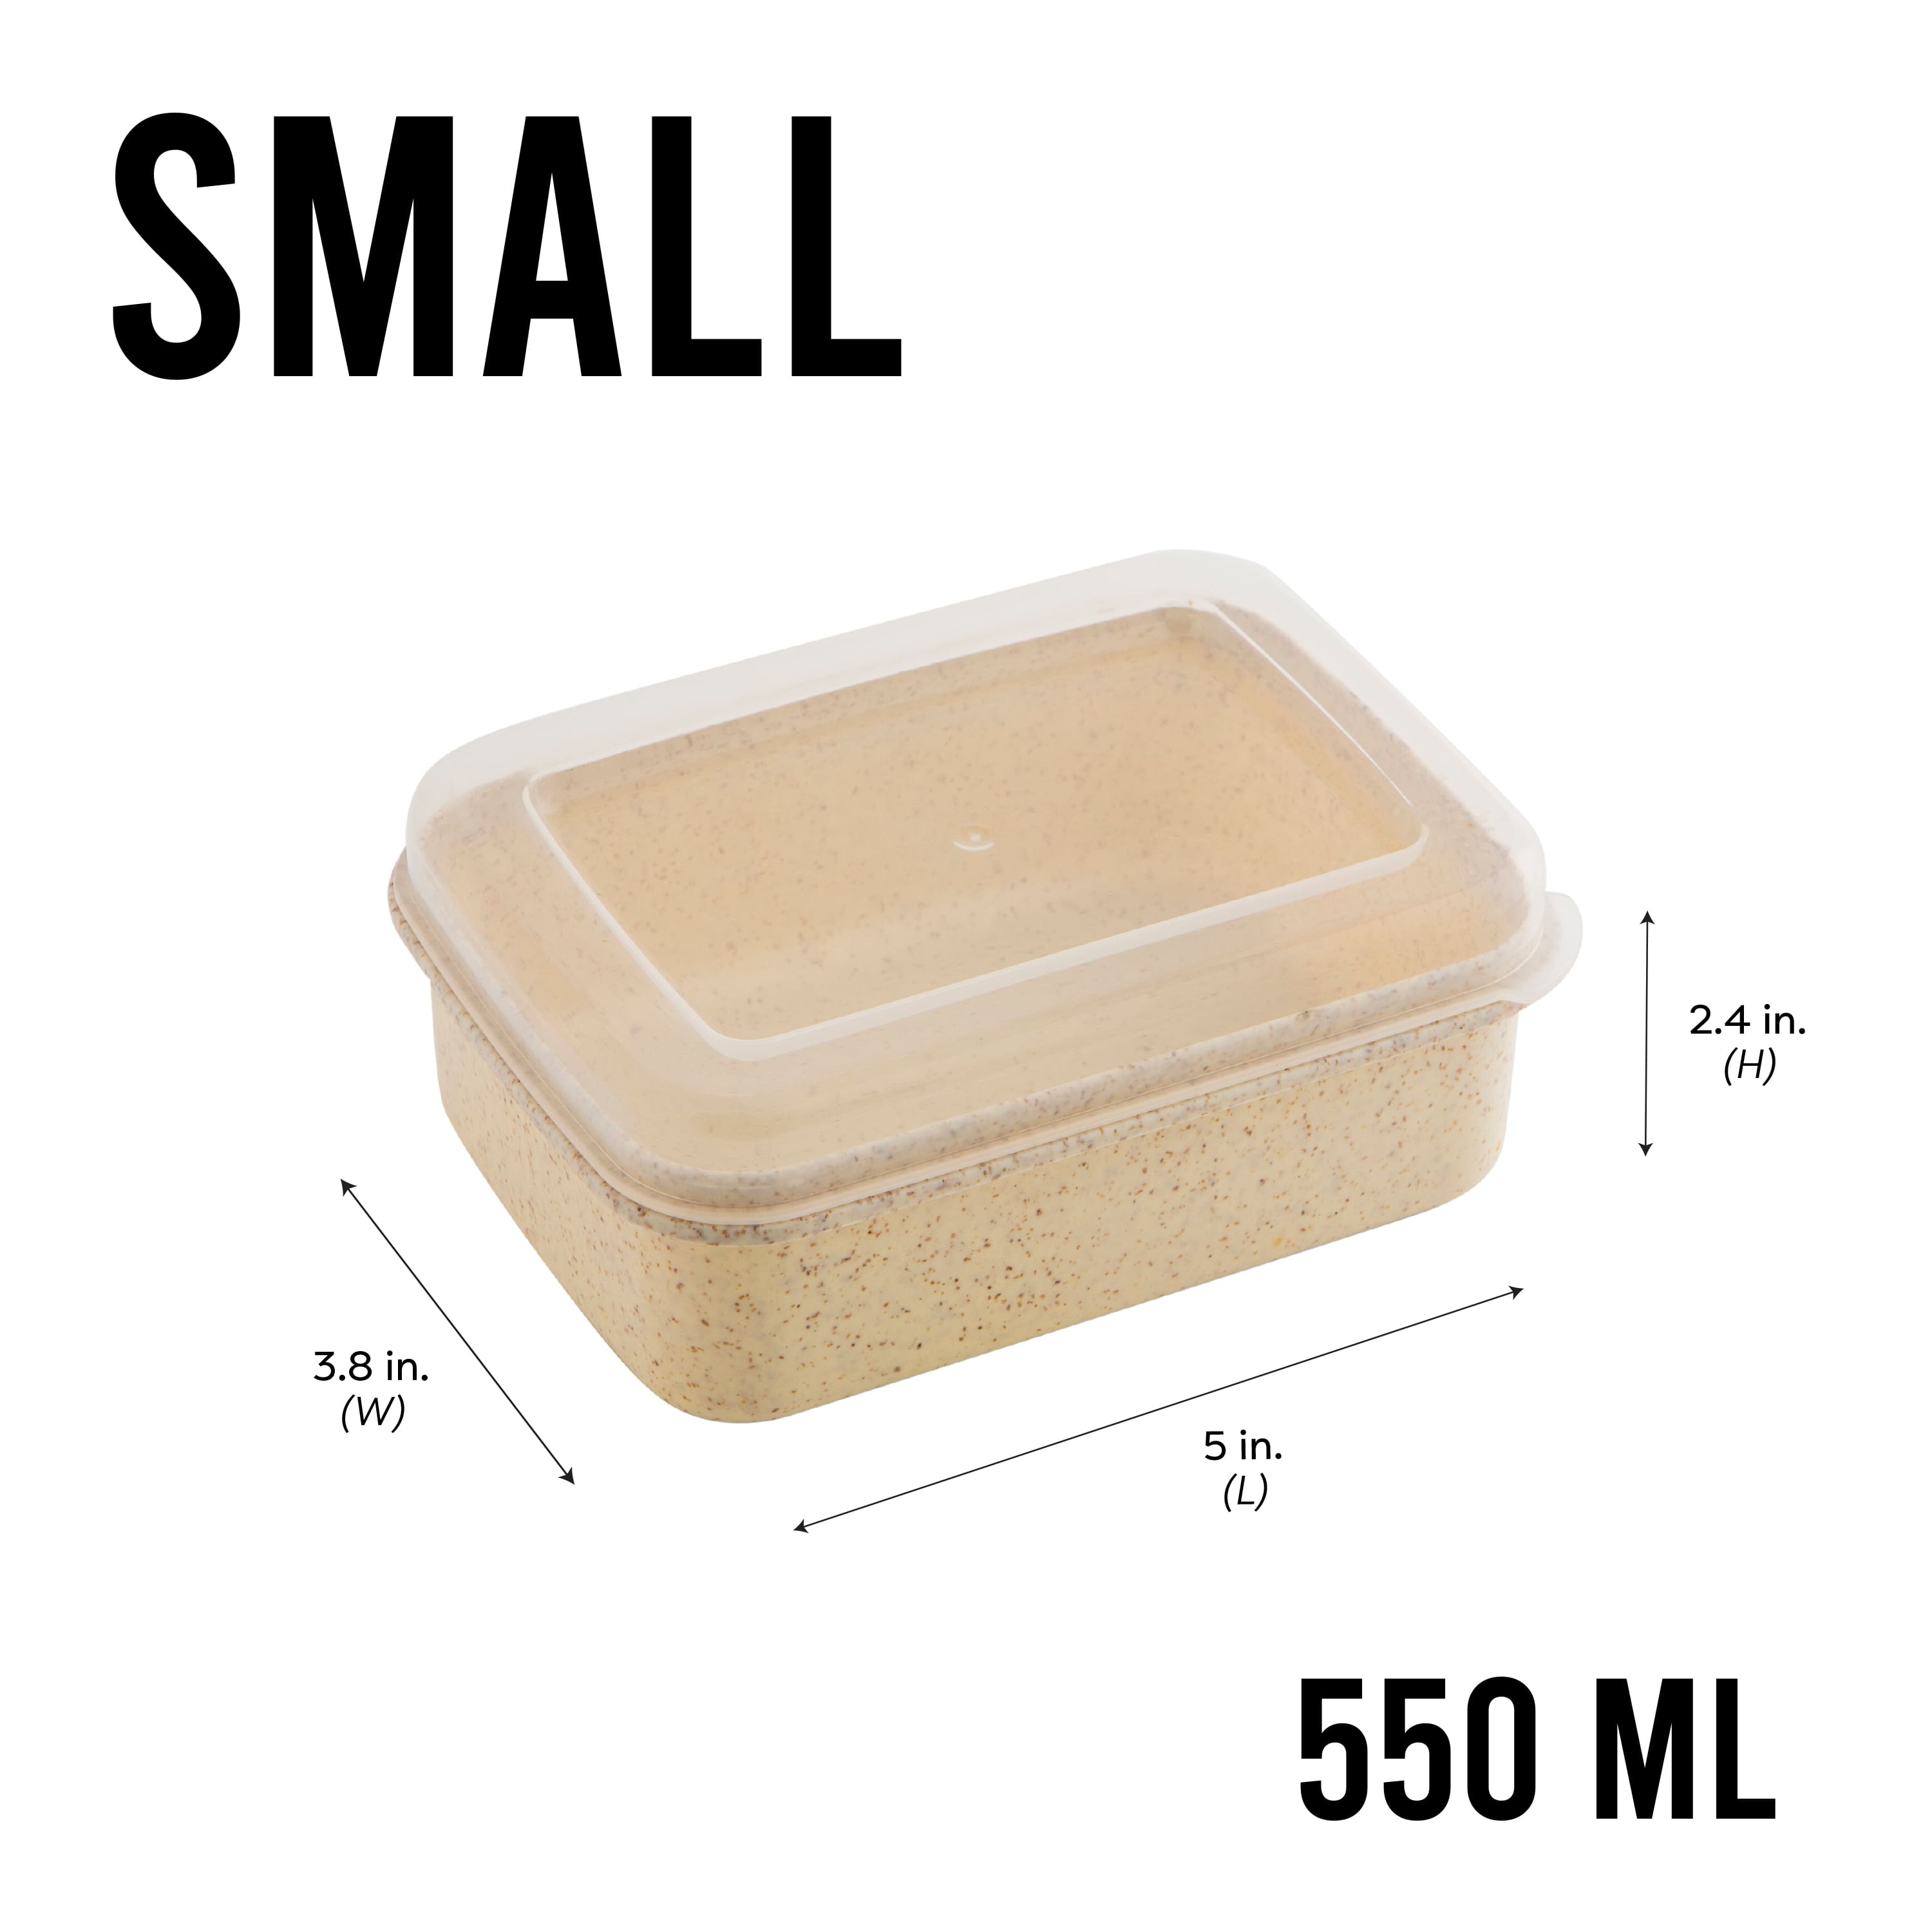 Simplify 6-Piece Natural Food Storage Containers